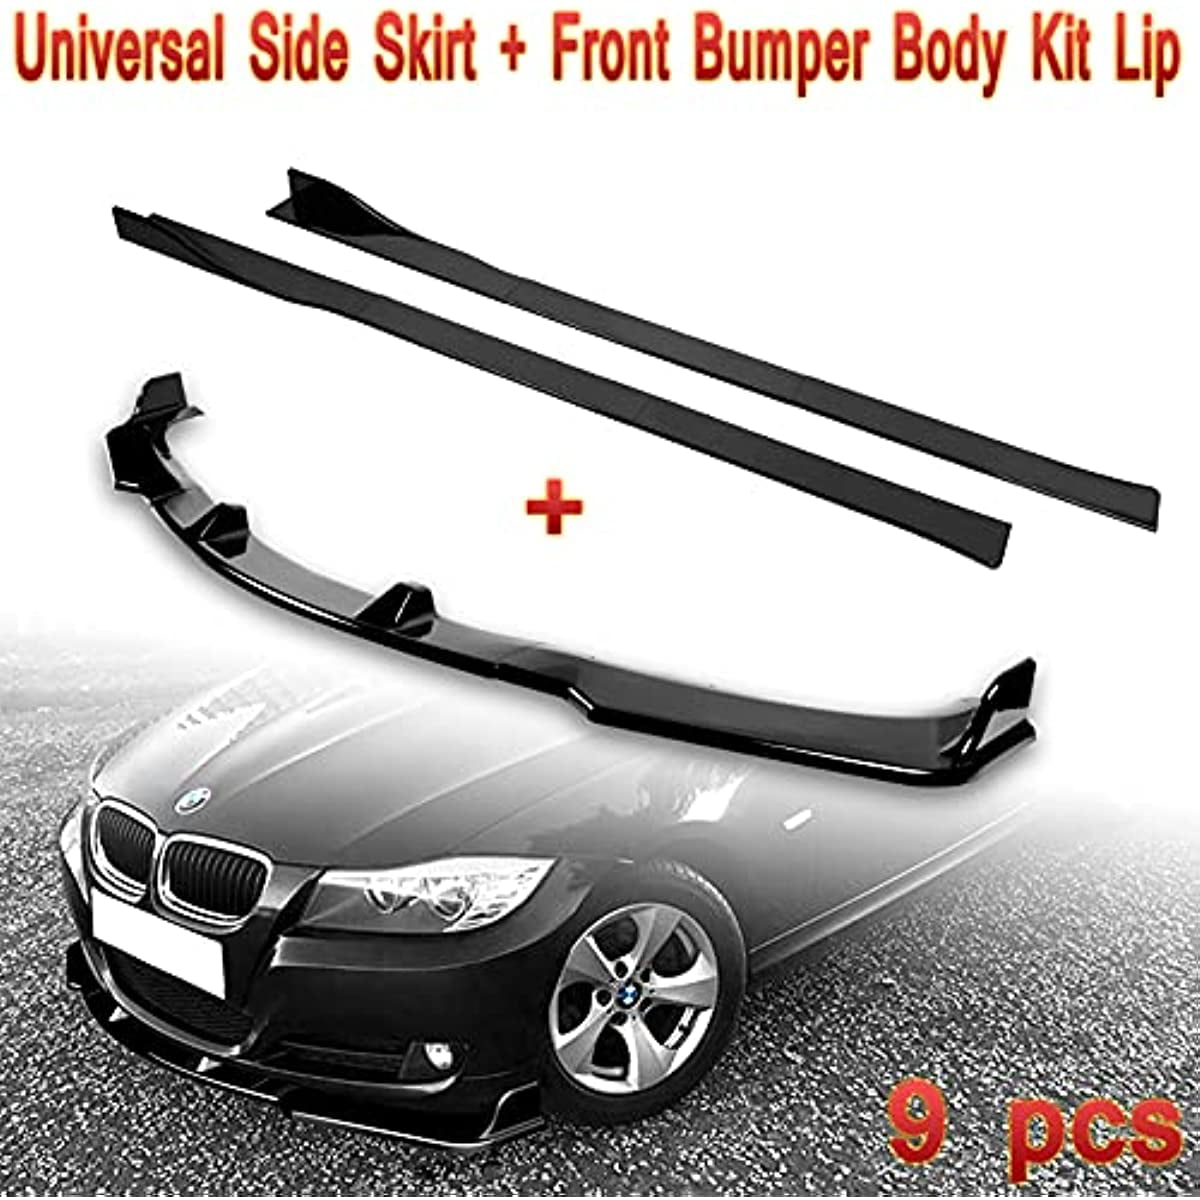 Q1-TECH 2010 2011 Front Bumper Lip Spoiler Air Chin Body Kit Splitter Painted Glossy Black ABS Front Bumper Lip fit for compatible with 2009-2012 BMW E90 Sedan 3-Series 328i 325i 335d 